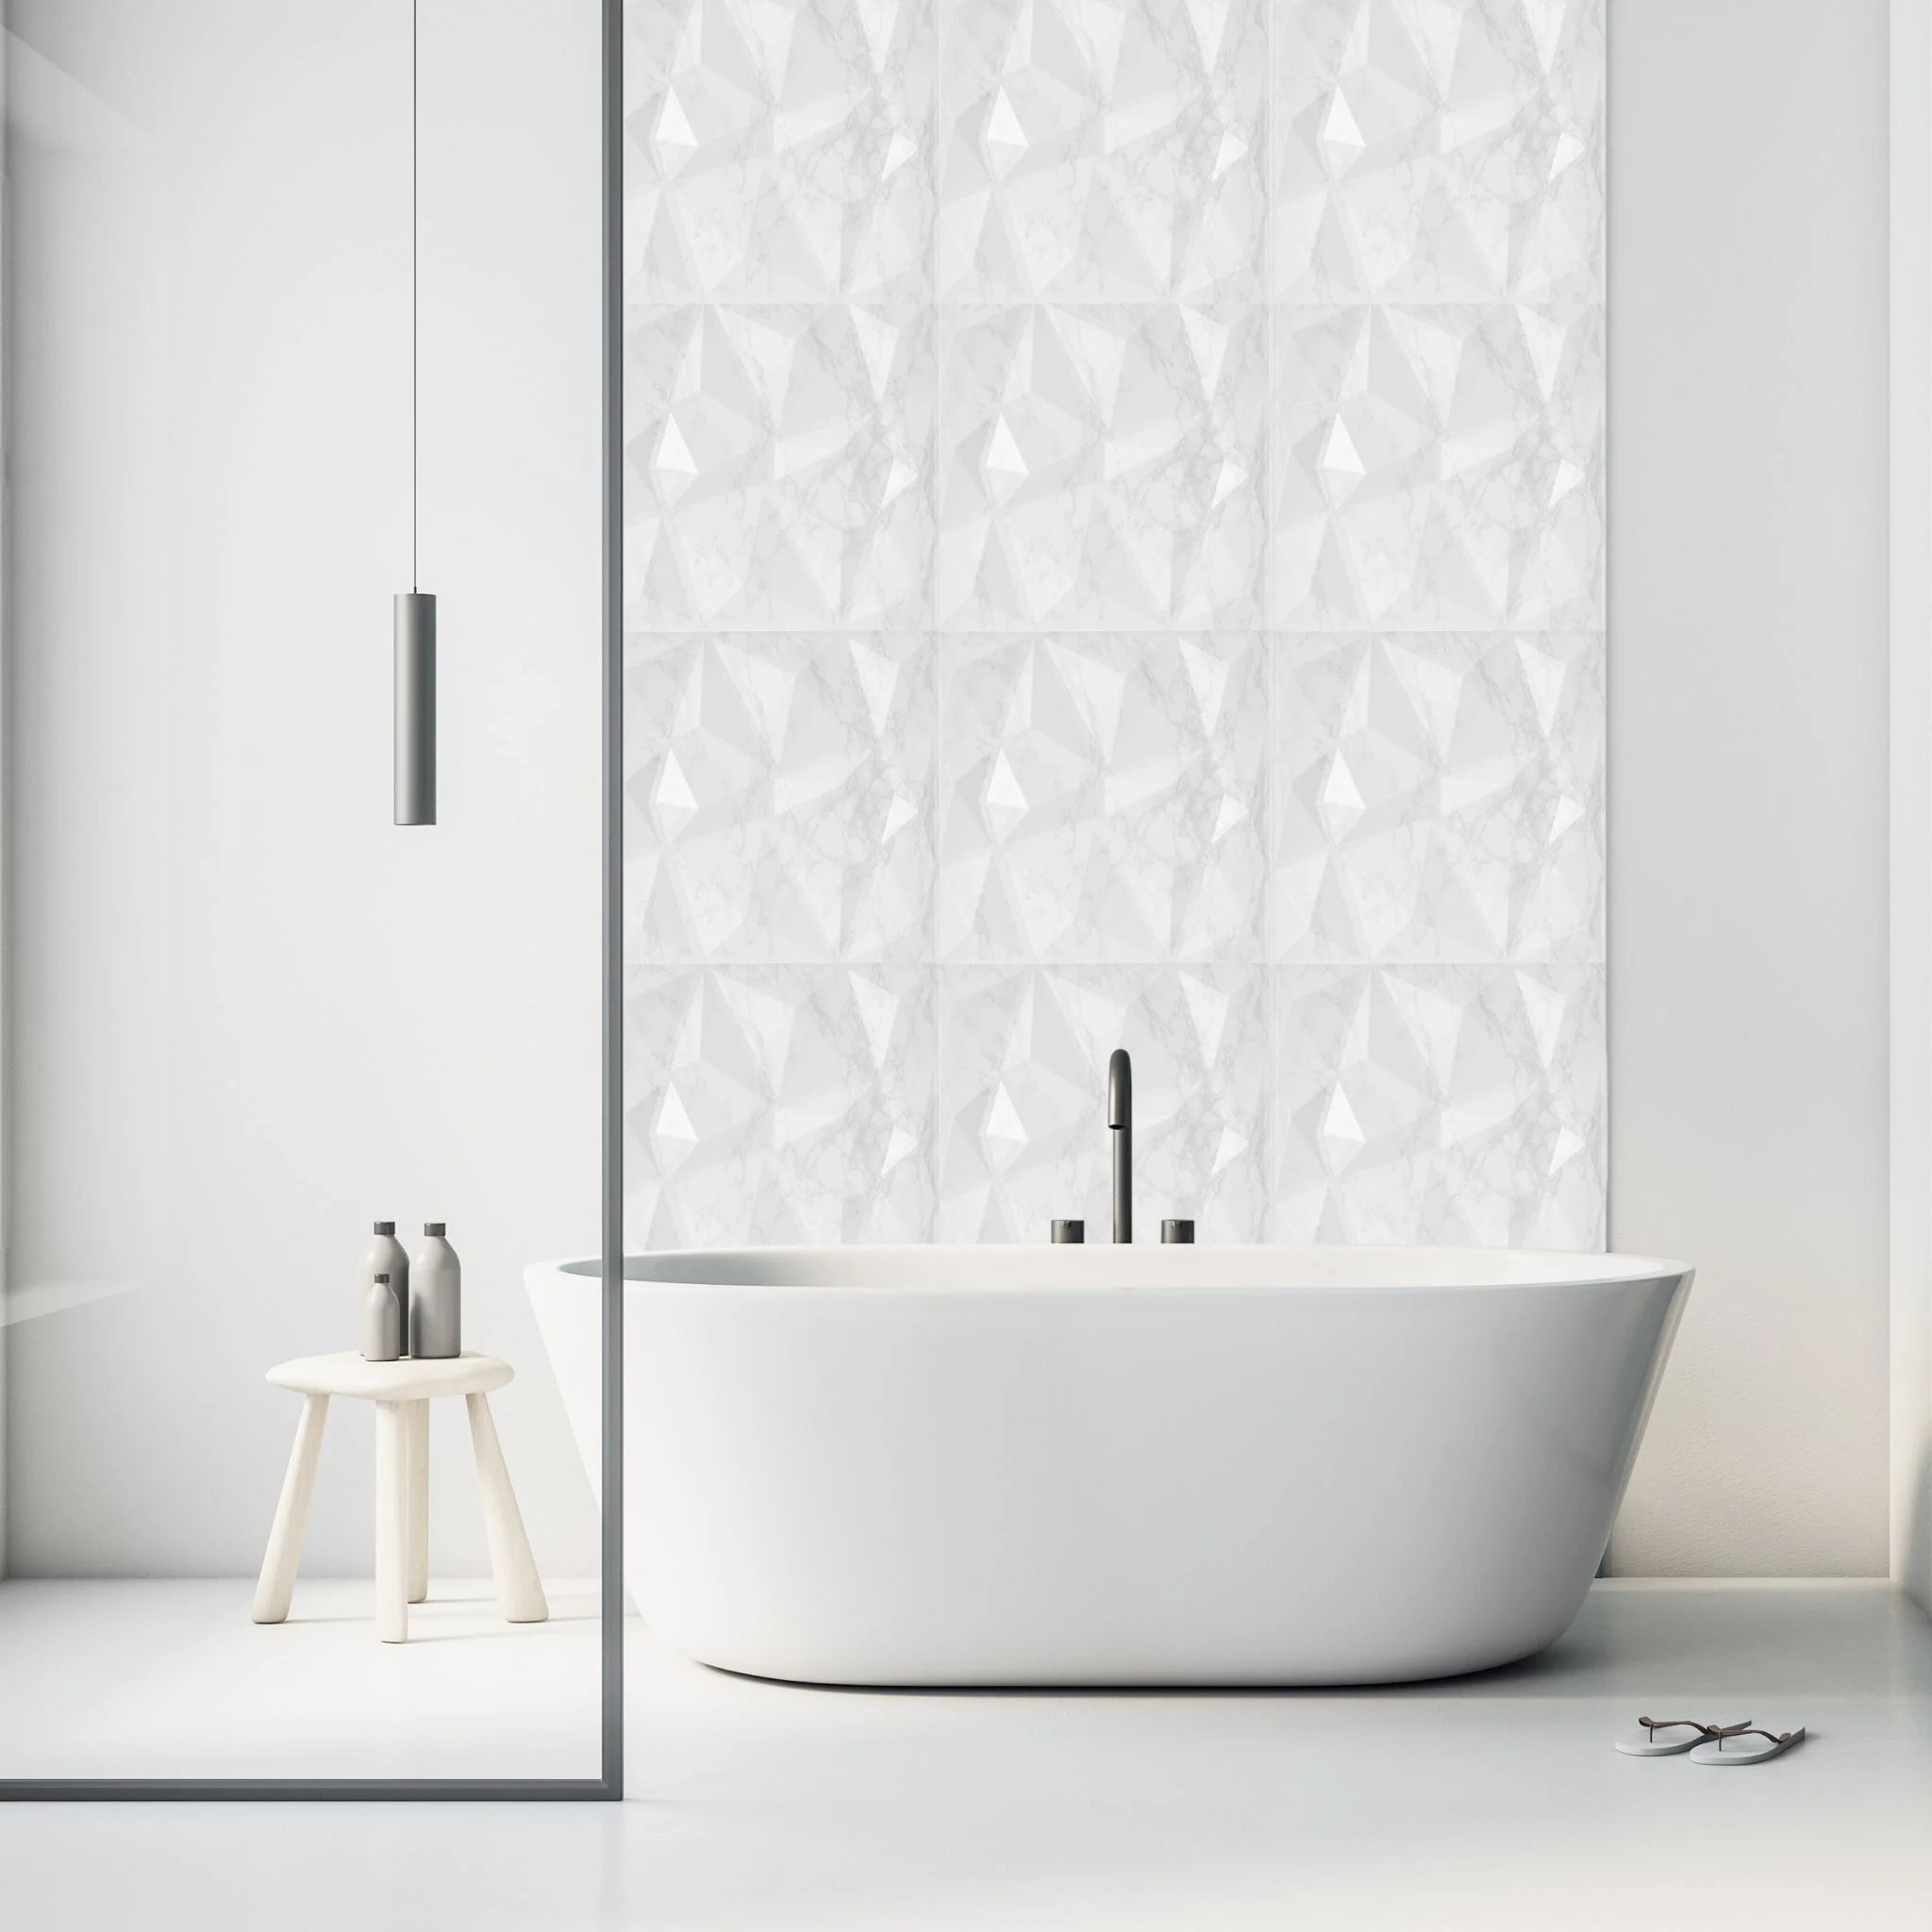 Marble PVC wall panel with geometric design in stylish bath room